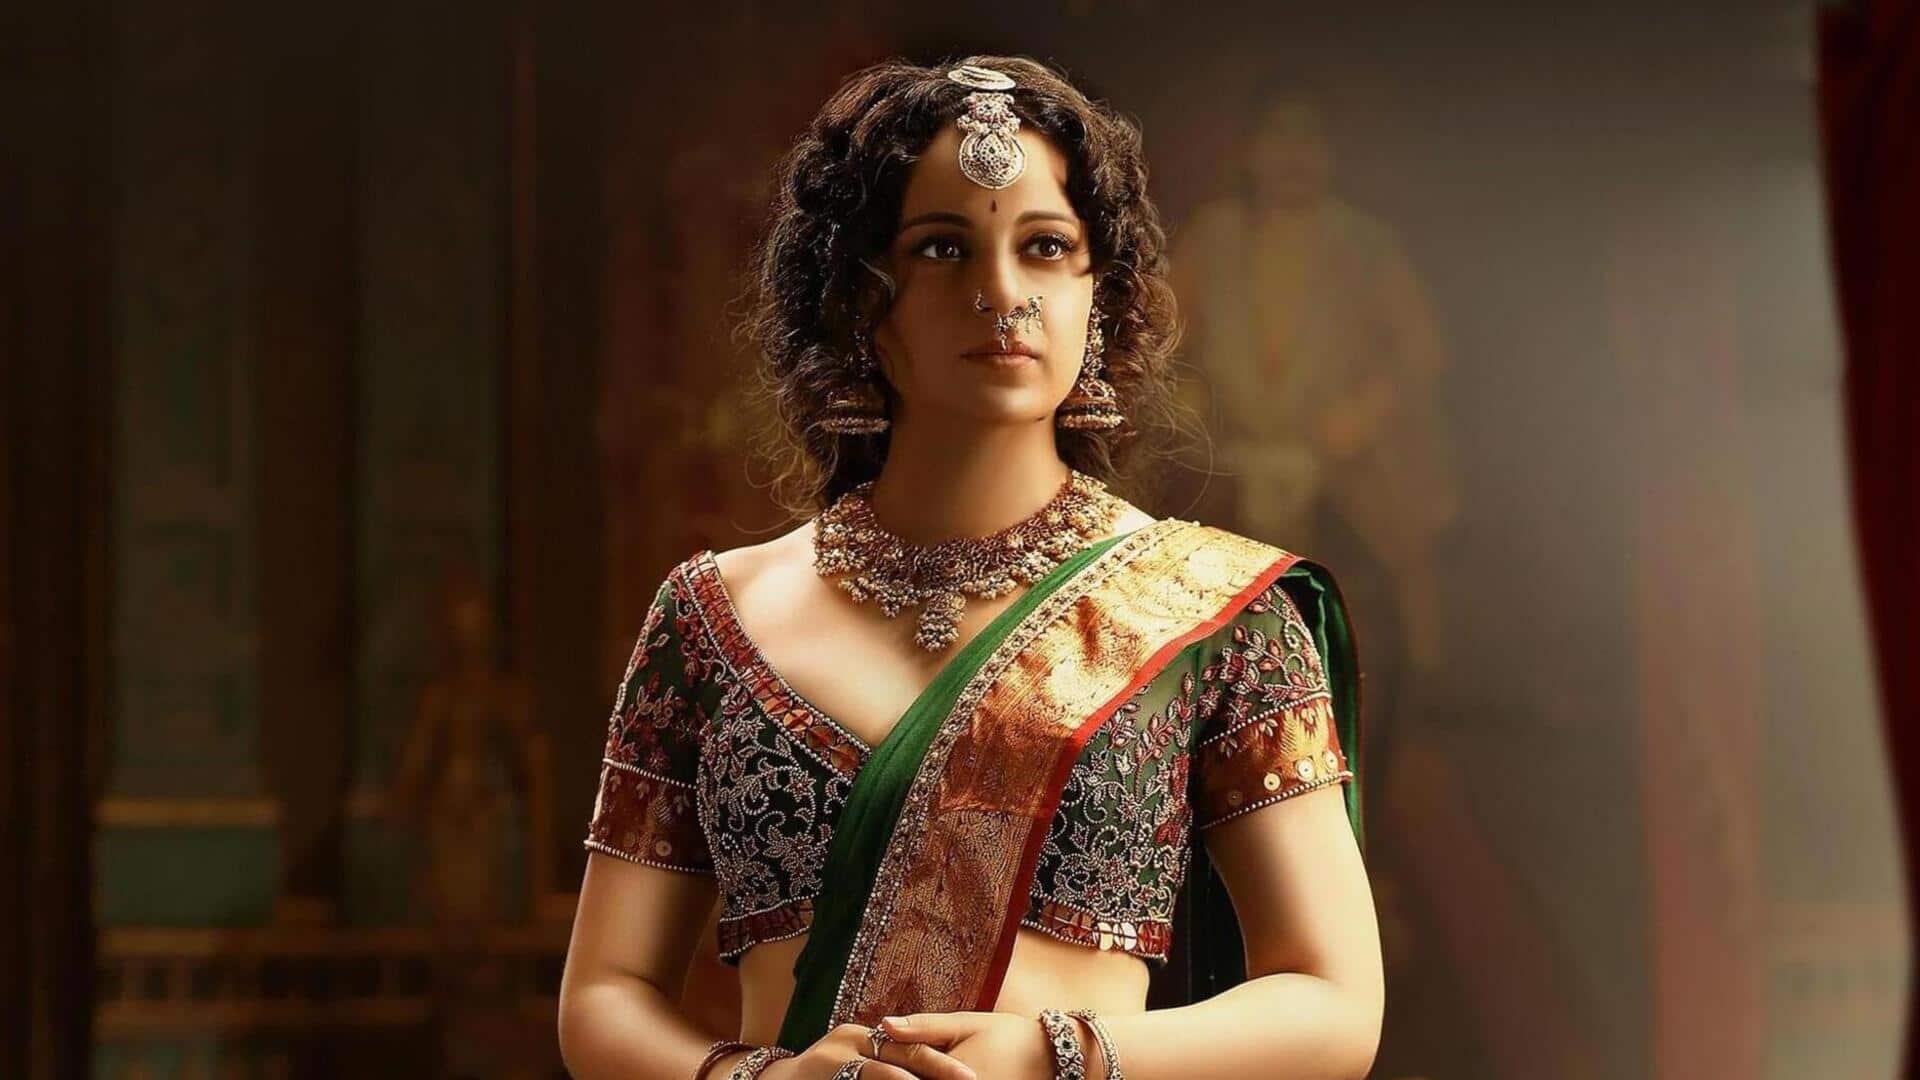 Box office prediction: 'Chandramukhi 2' will dominate South Indian belts